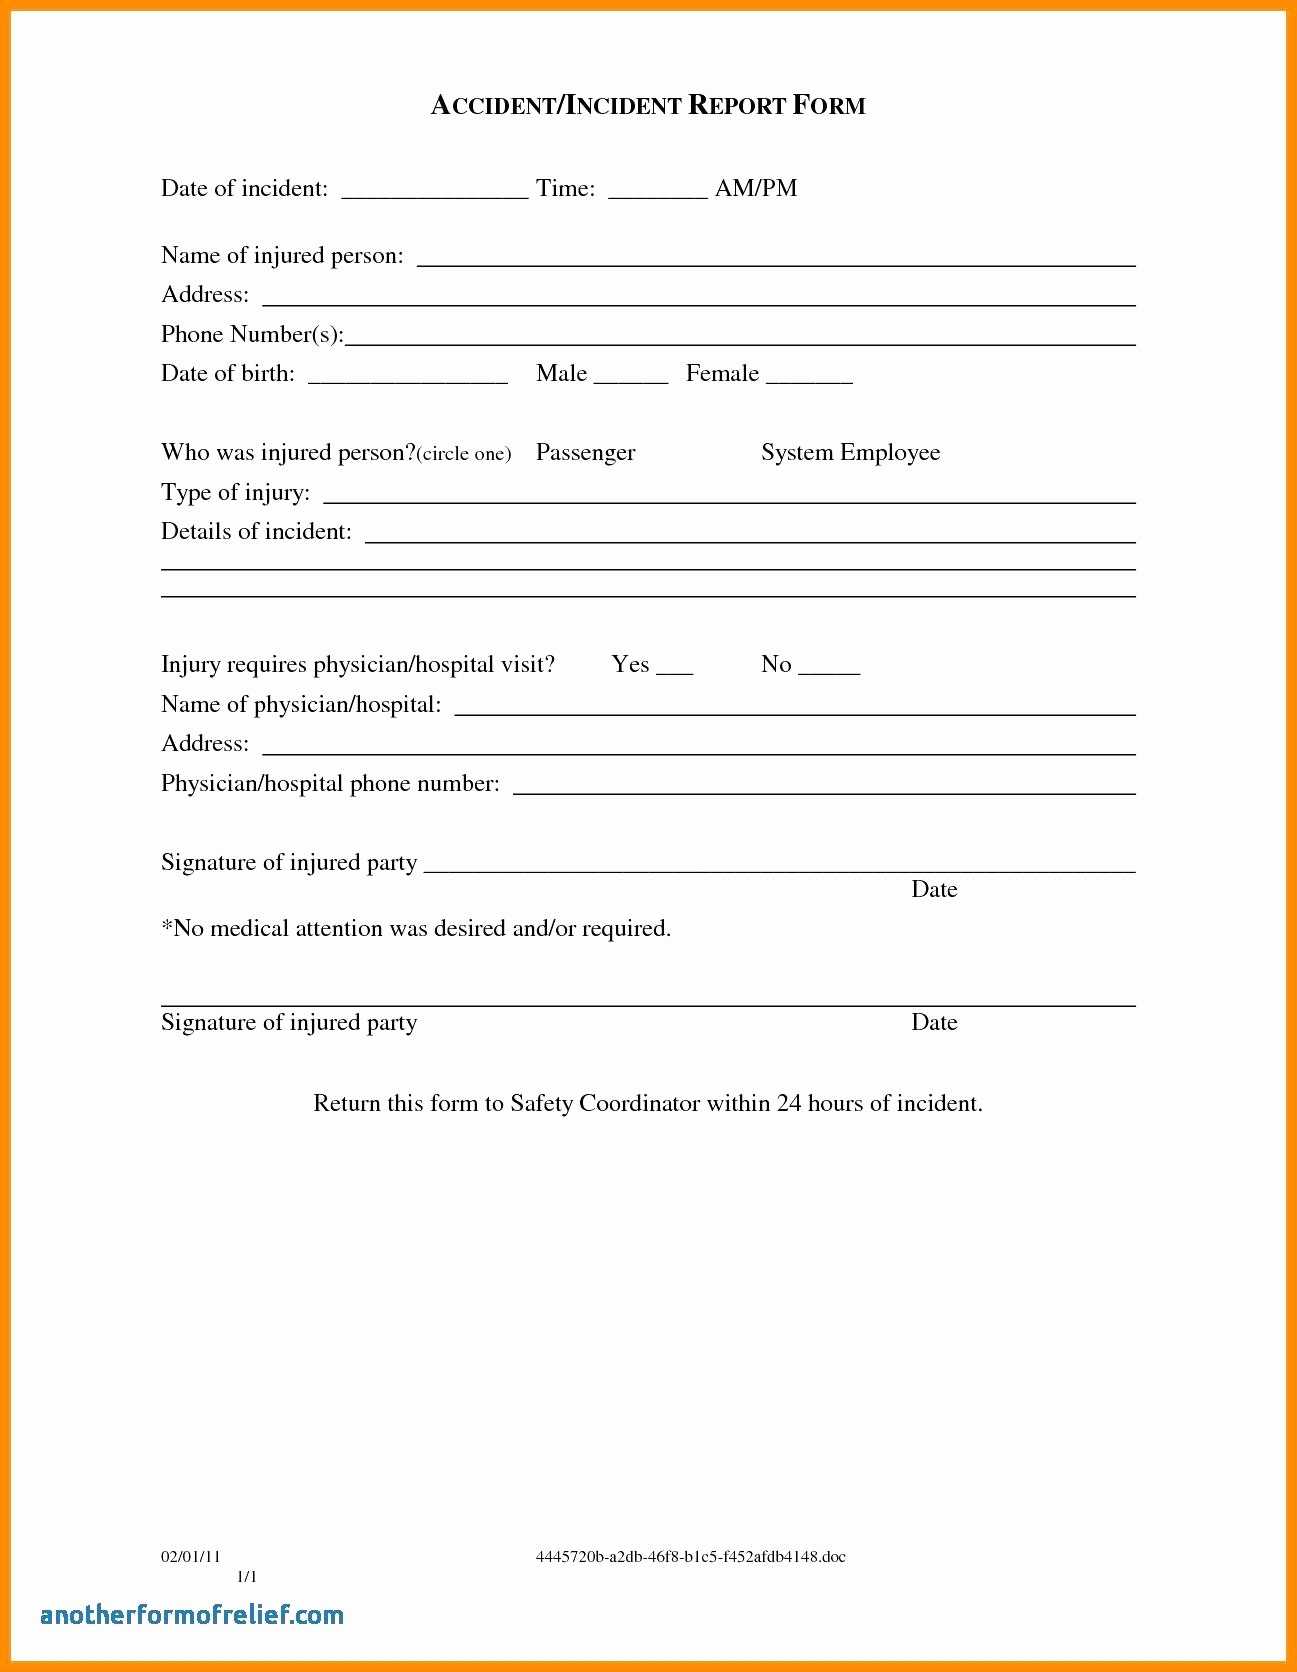 022 Template Ideas Accident Report Forms Incident Hazard For Within Hazard Incident Report Form Template